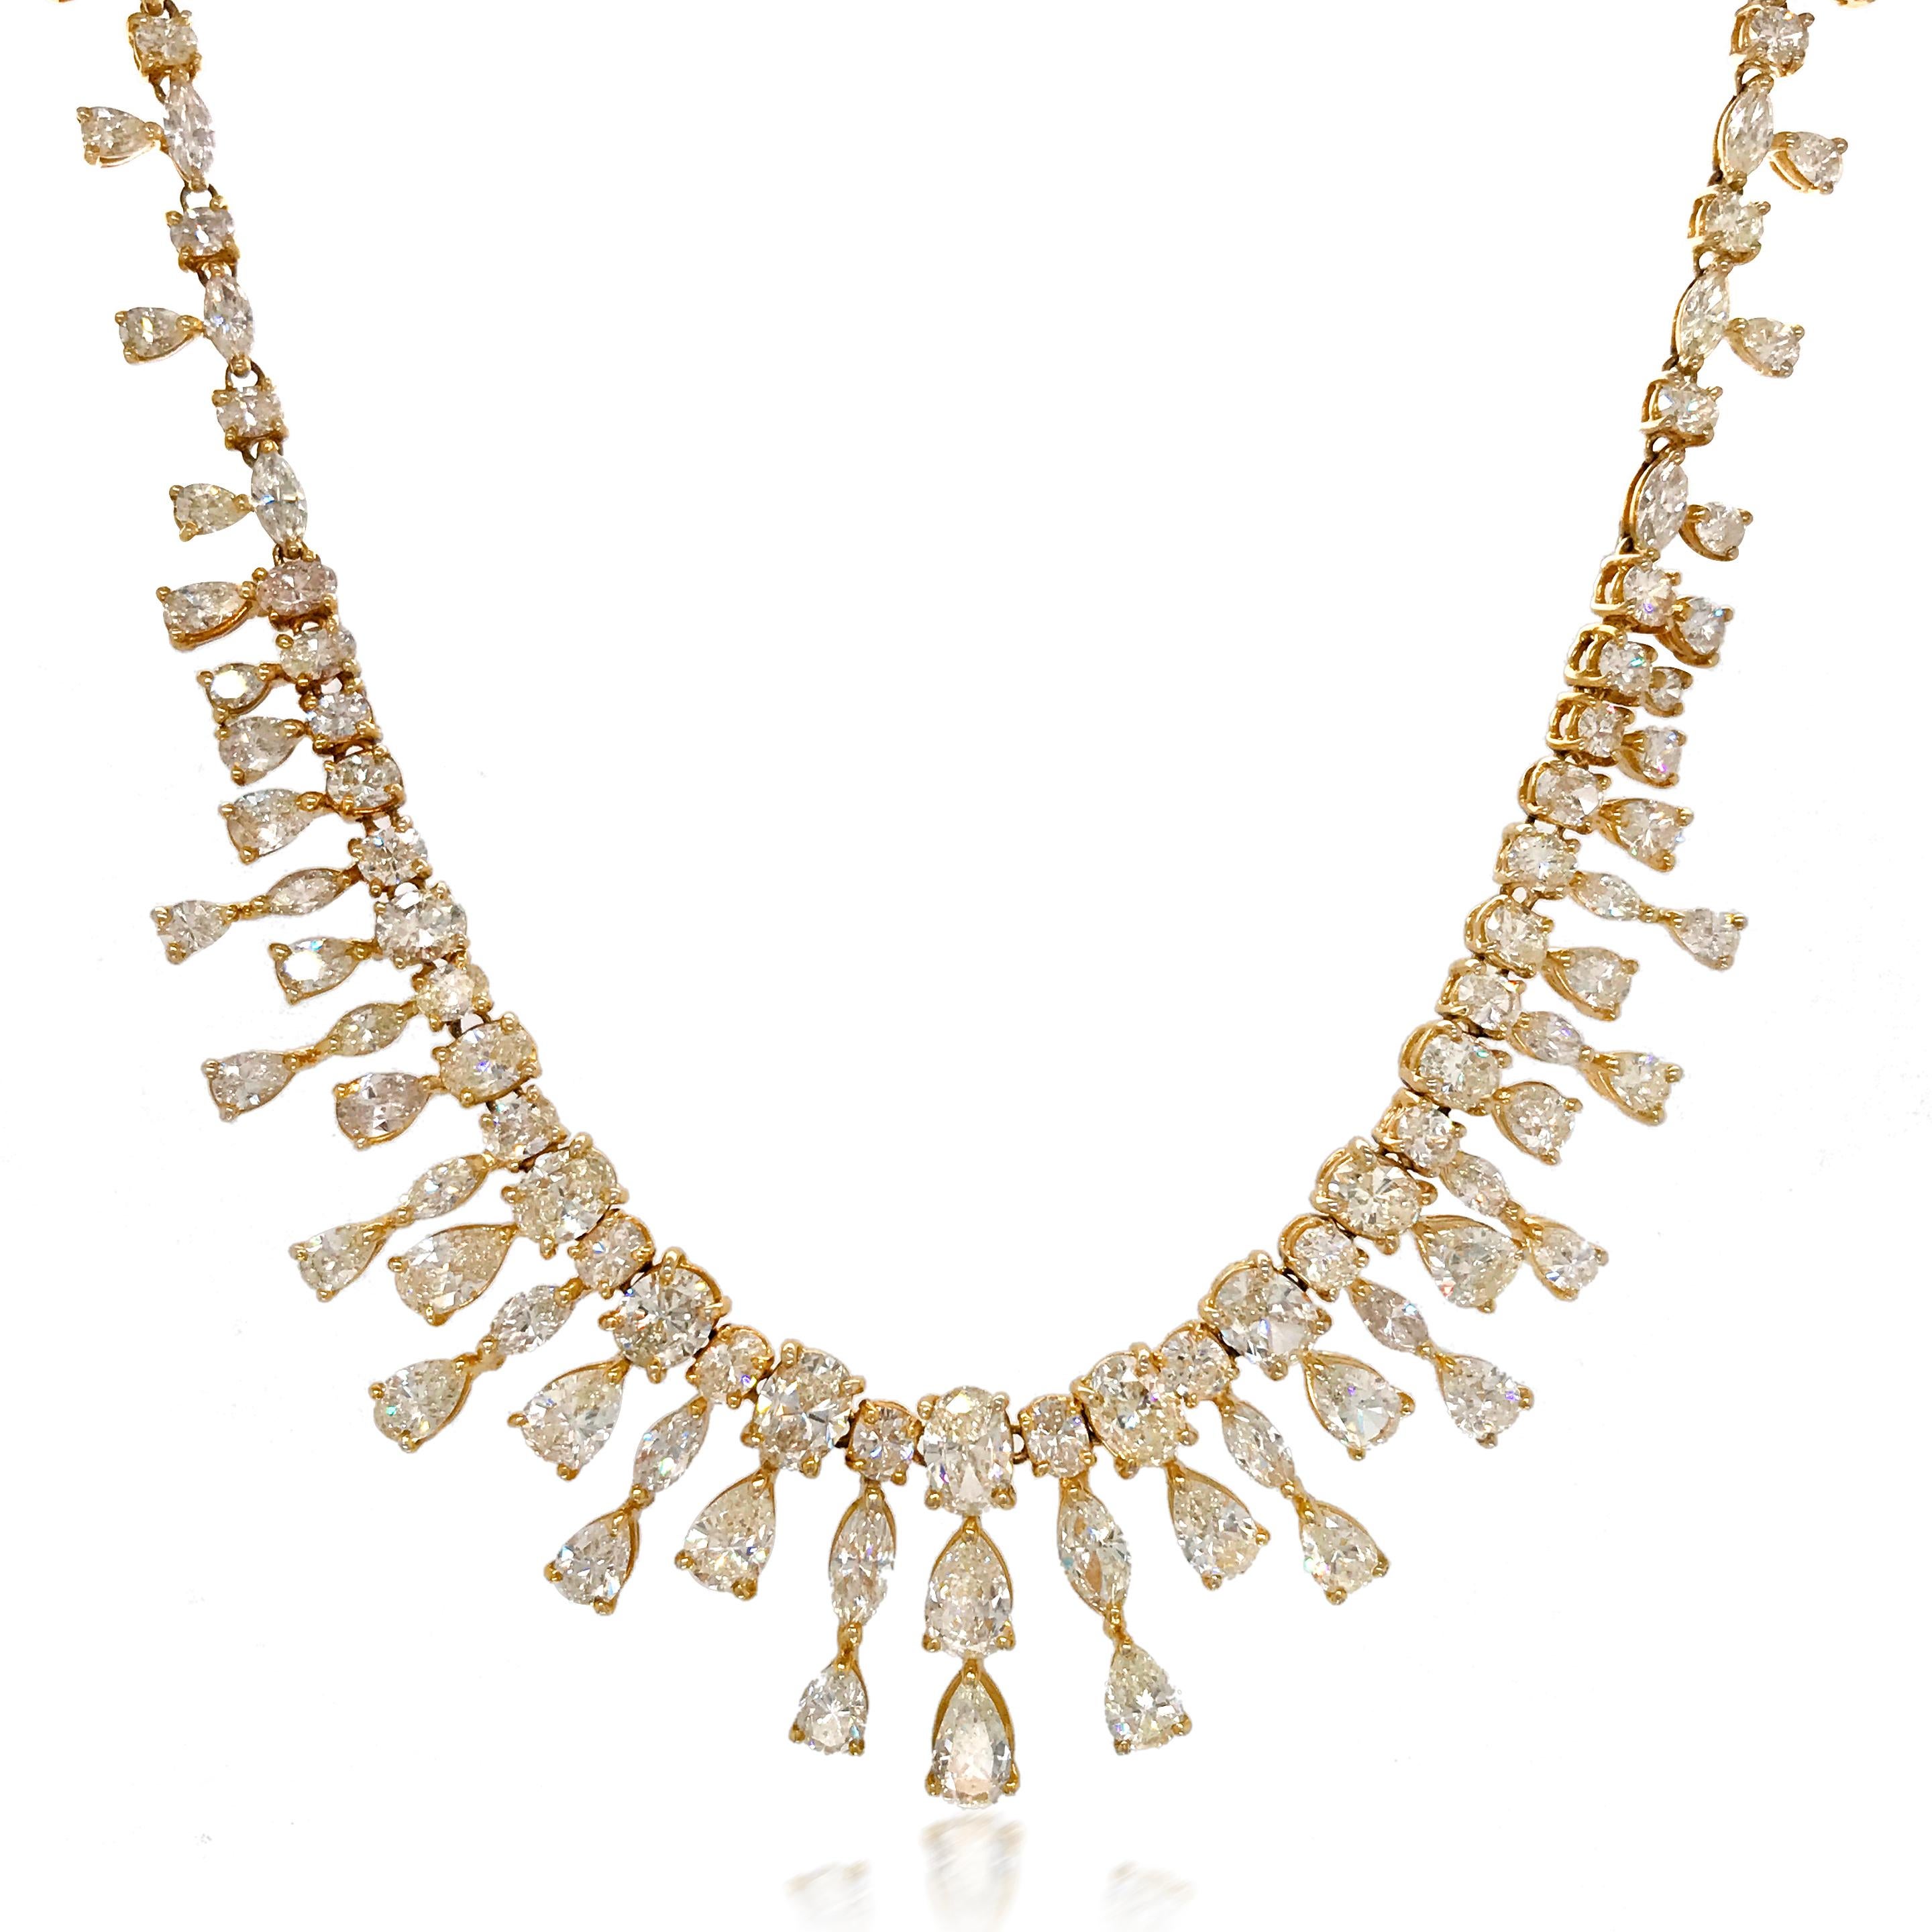 This elegant diamond necklace is handcrafted in solid 18K yellow gold, weighing 41.6 grams and measuring 49.5cm (19.5'') long. This eye-catching diamond necklace constitutes round-, marquise-, pear- and oval-cut diamonds. The high quality diamonds